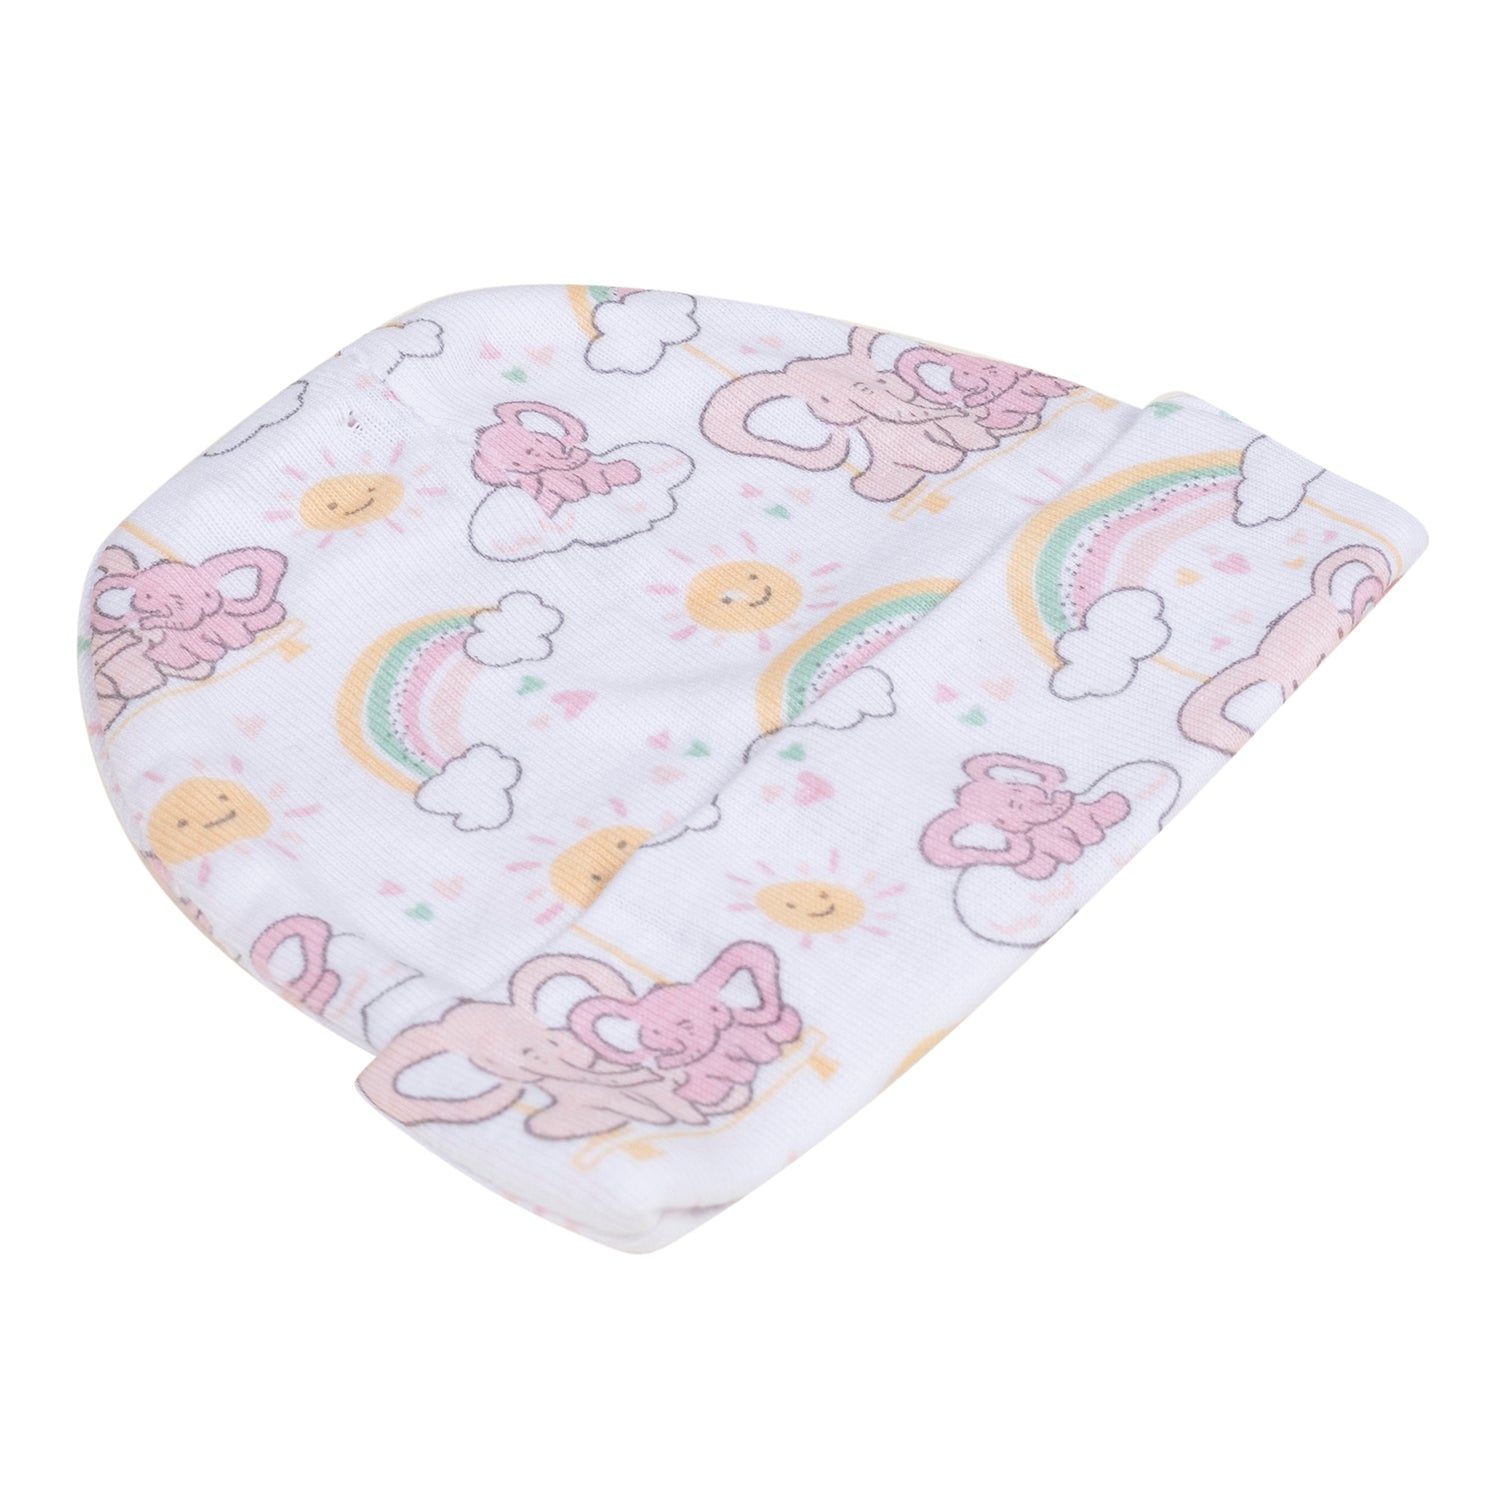 Baby Moo Princess Perfection Infants Ultra Soft 100% Cotton All Season Pack of 5 Caps - Pink